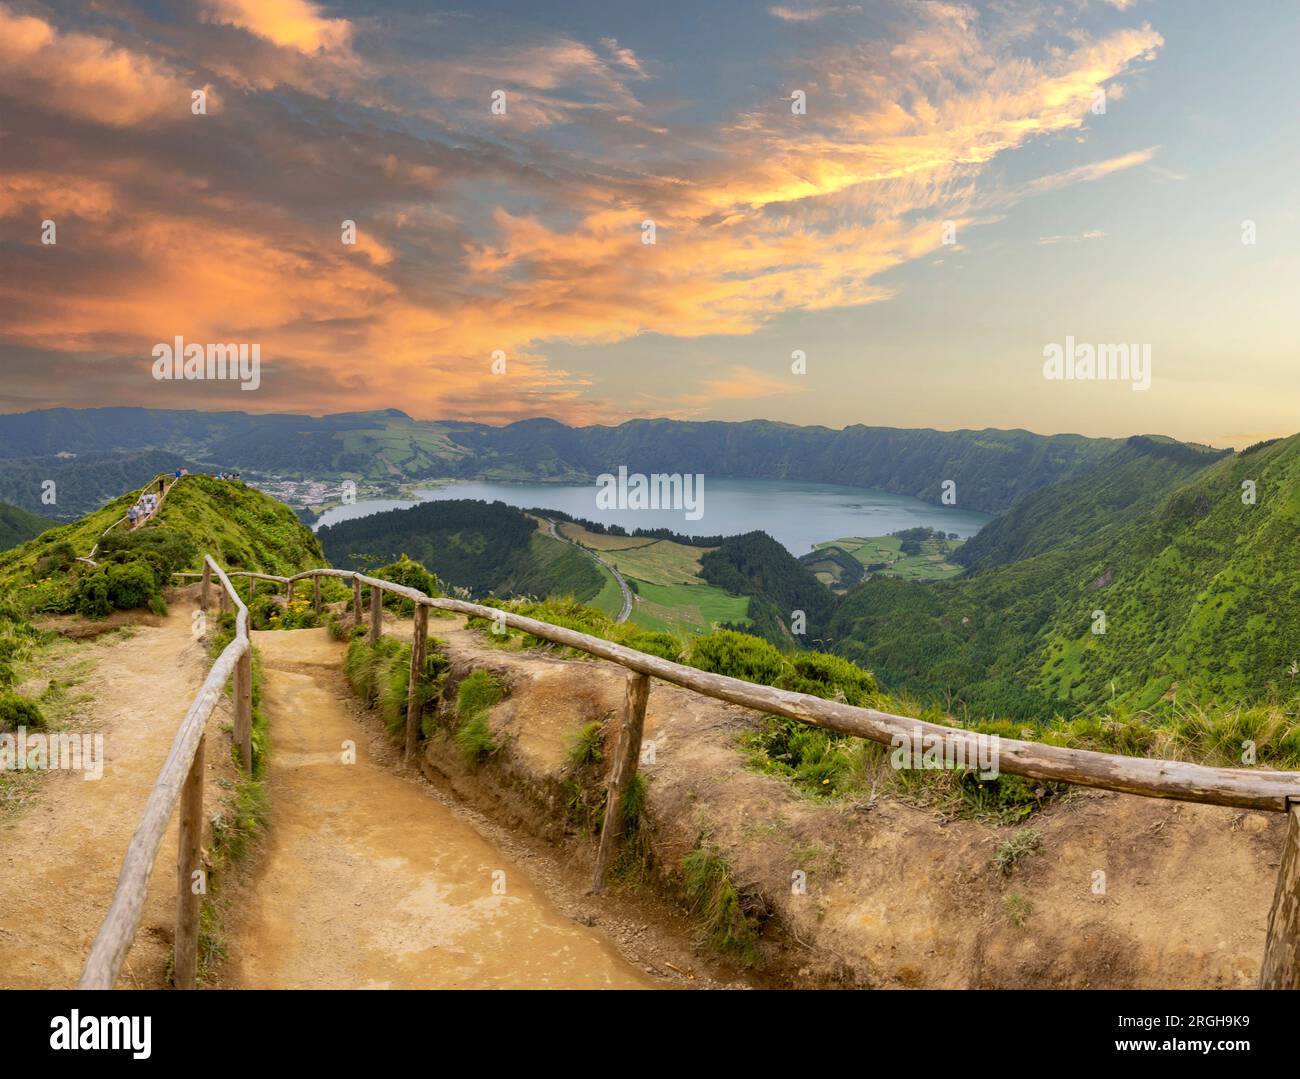 Panoramic landscape view of Twin Lakes of Sete Cidades from Boca do Inferno viewpoint in the island of Sao Miguel, Azores, Portugal Stock Photo